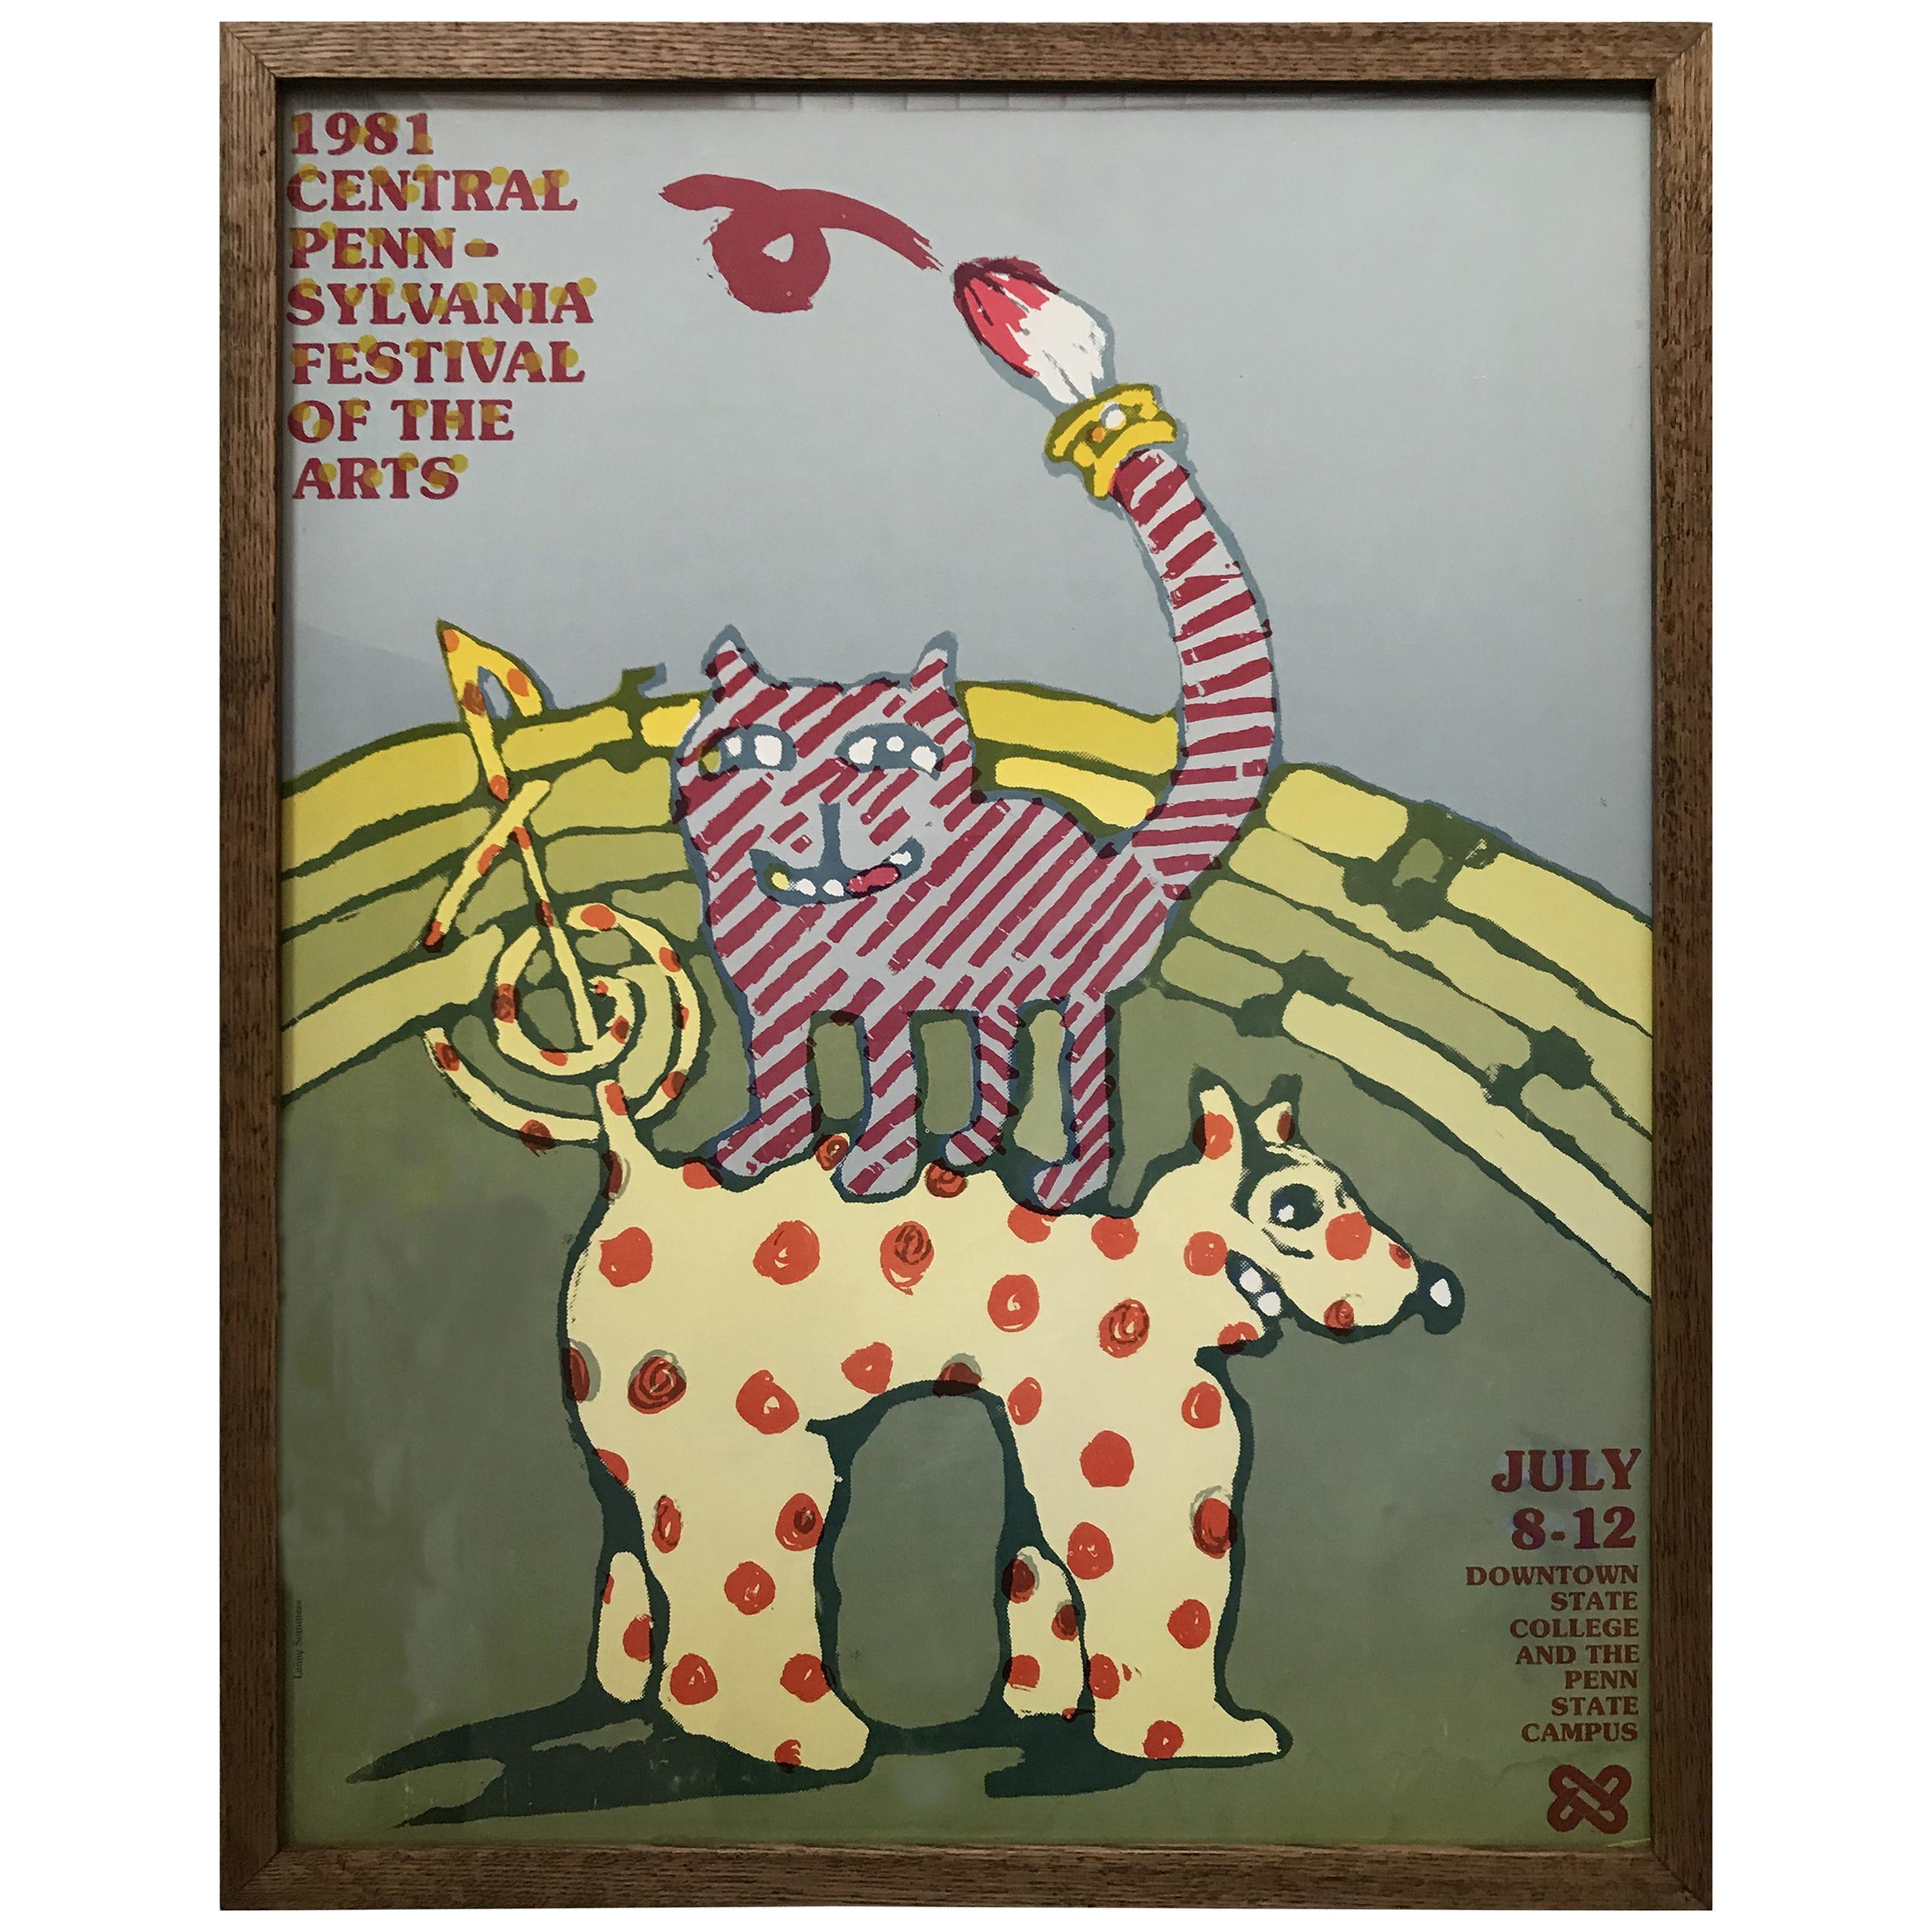 Graphic Poster for the Pensylvania Festival of the Arts by Lanny Sommese